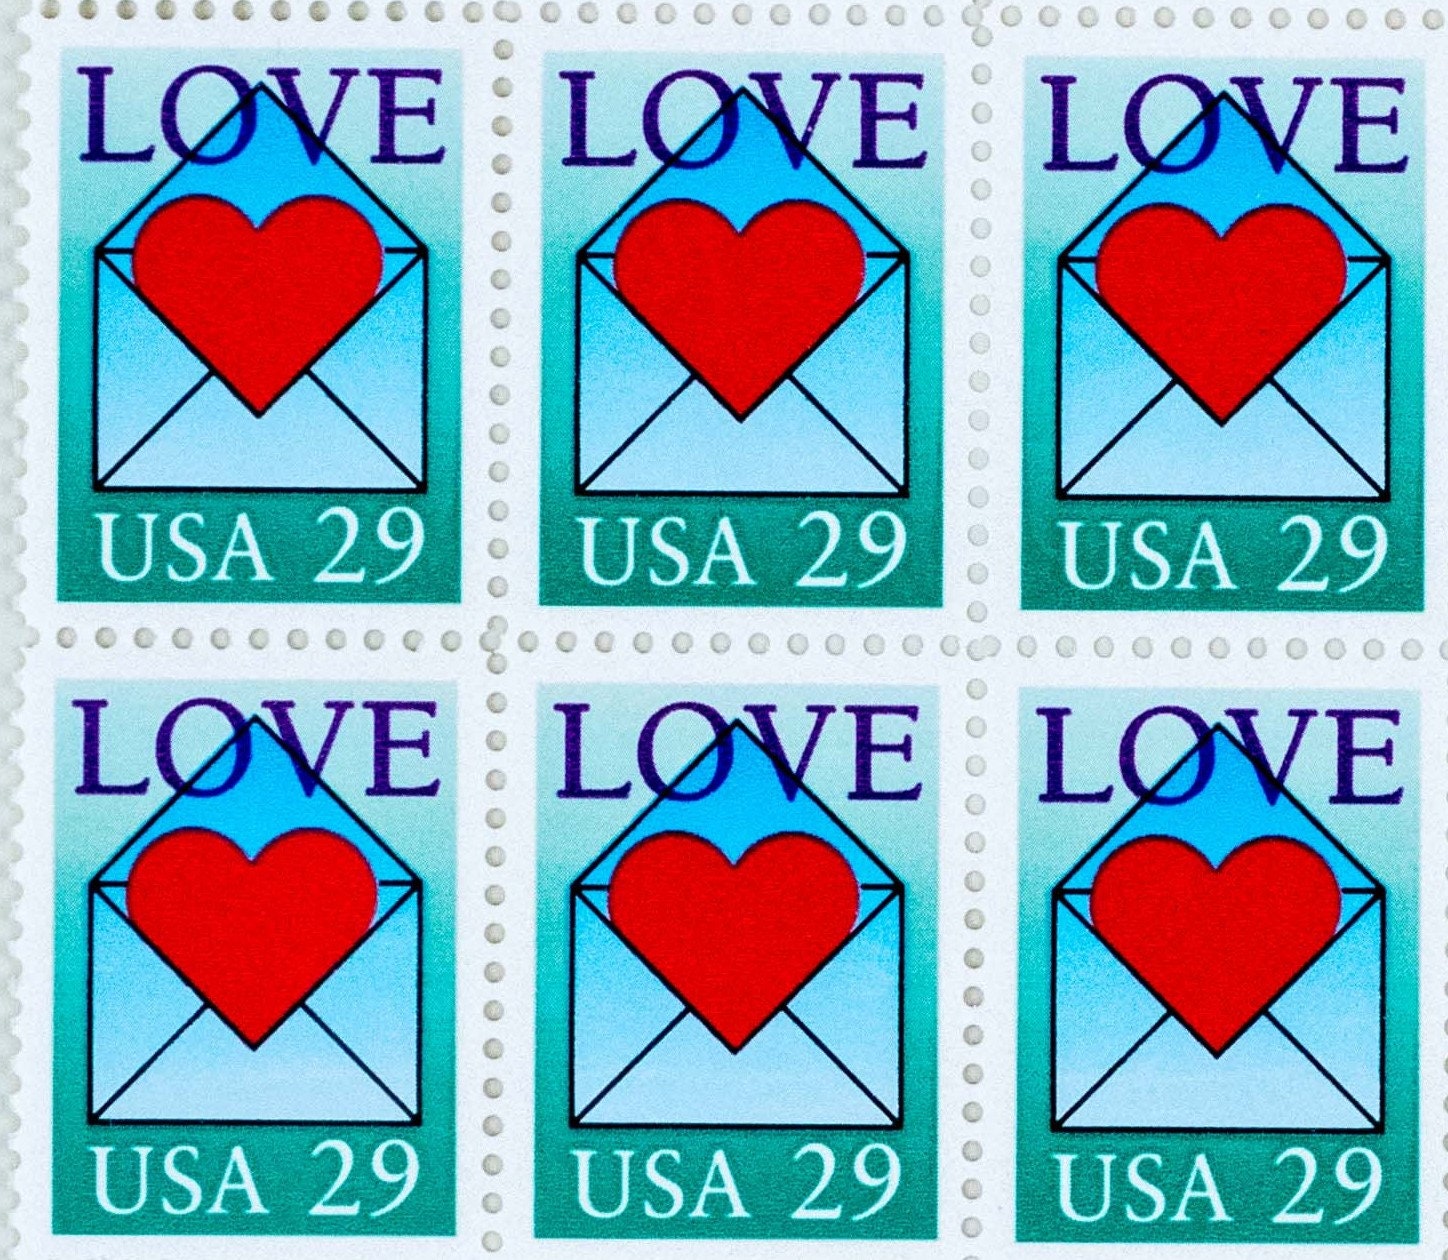 16 Love Series Stamps, Envelope With Heart, 29 Cent Postage 